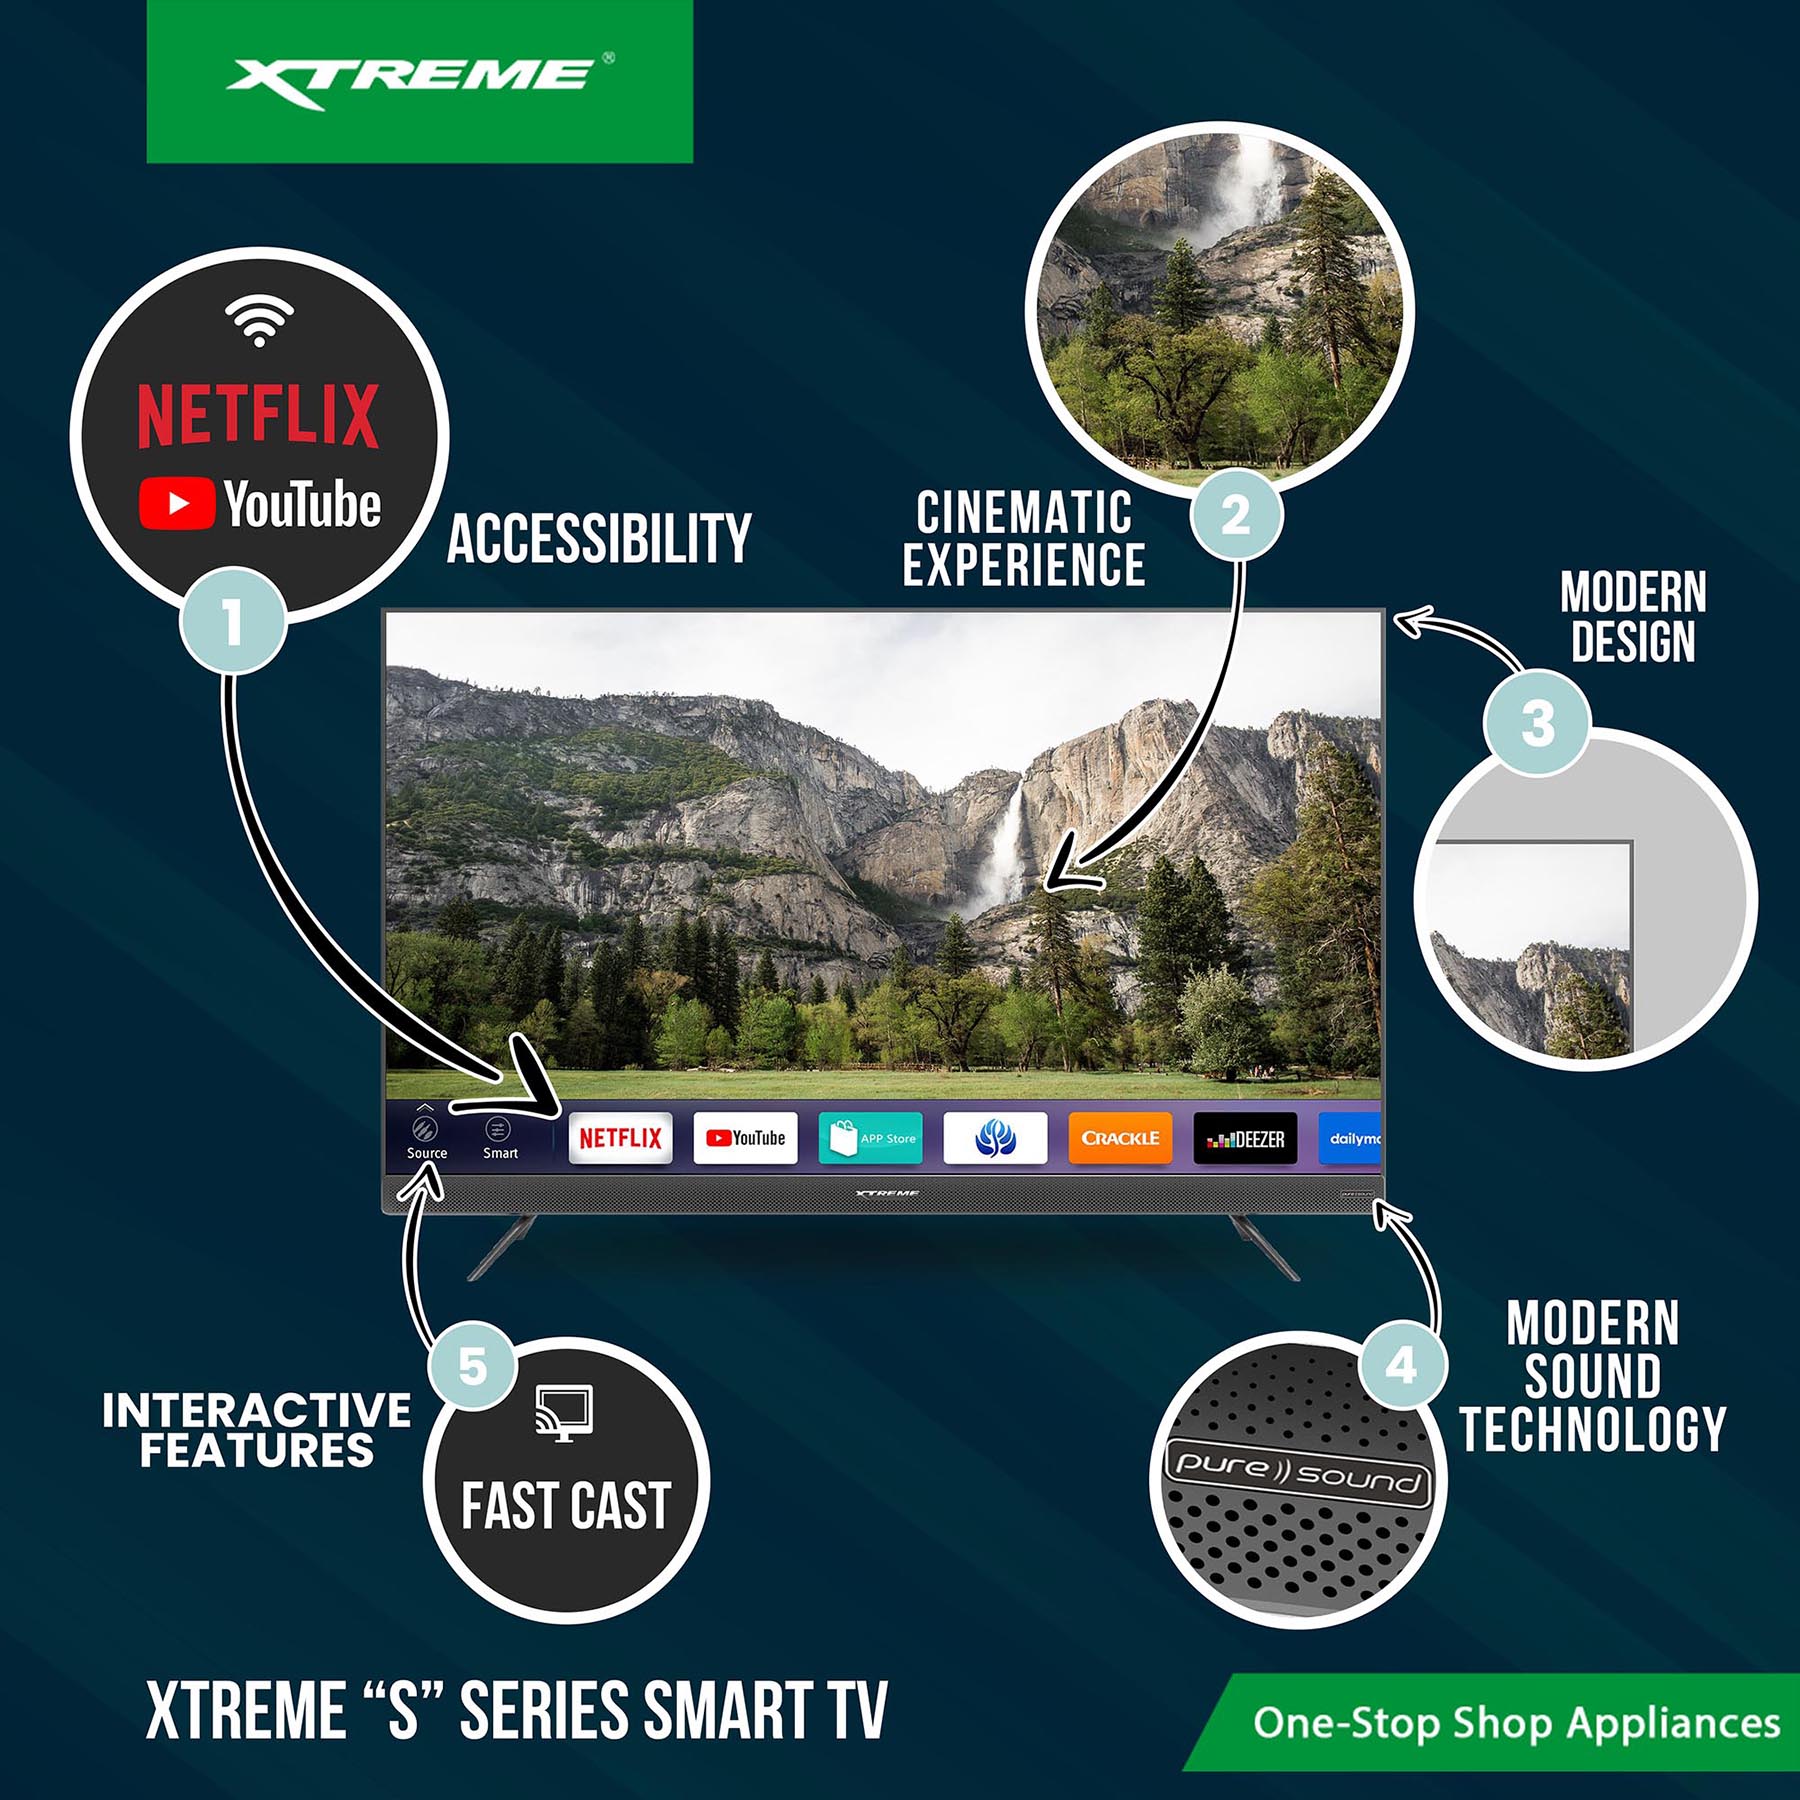 Five reasons to choose the Xtreme S Series Smart TV for your next home entertainment